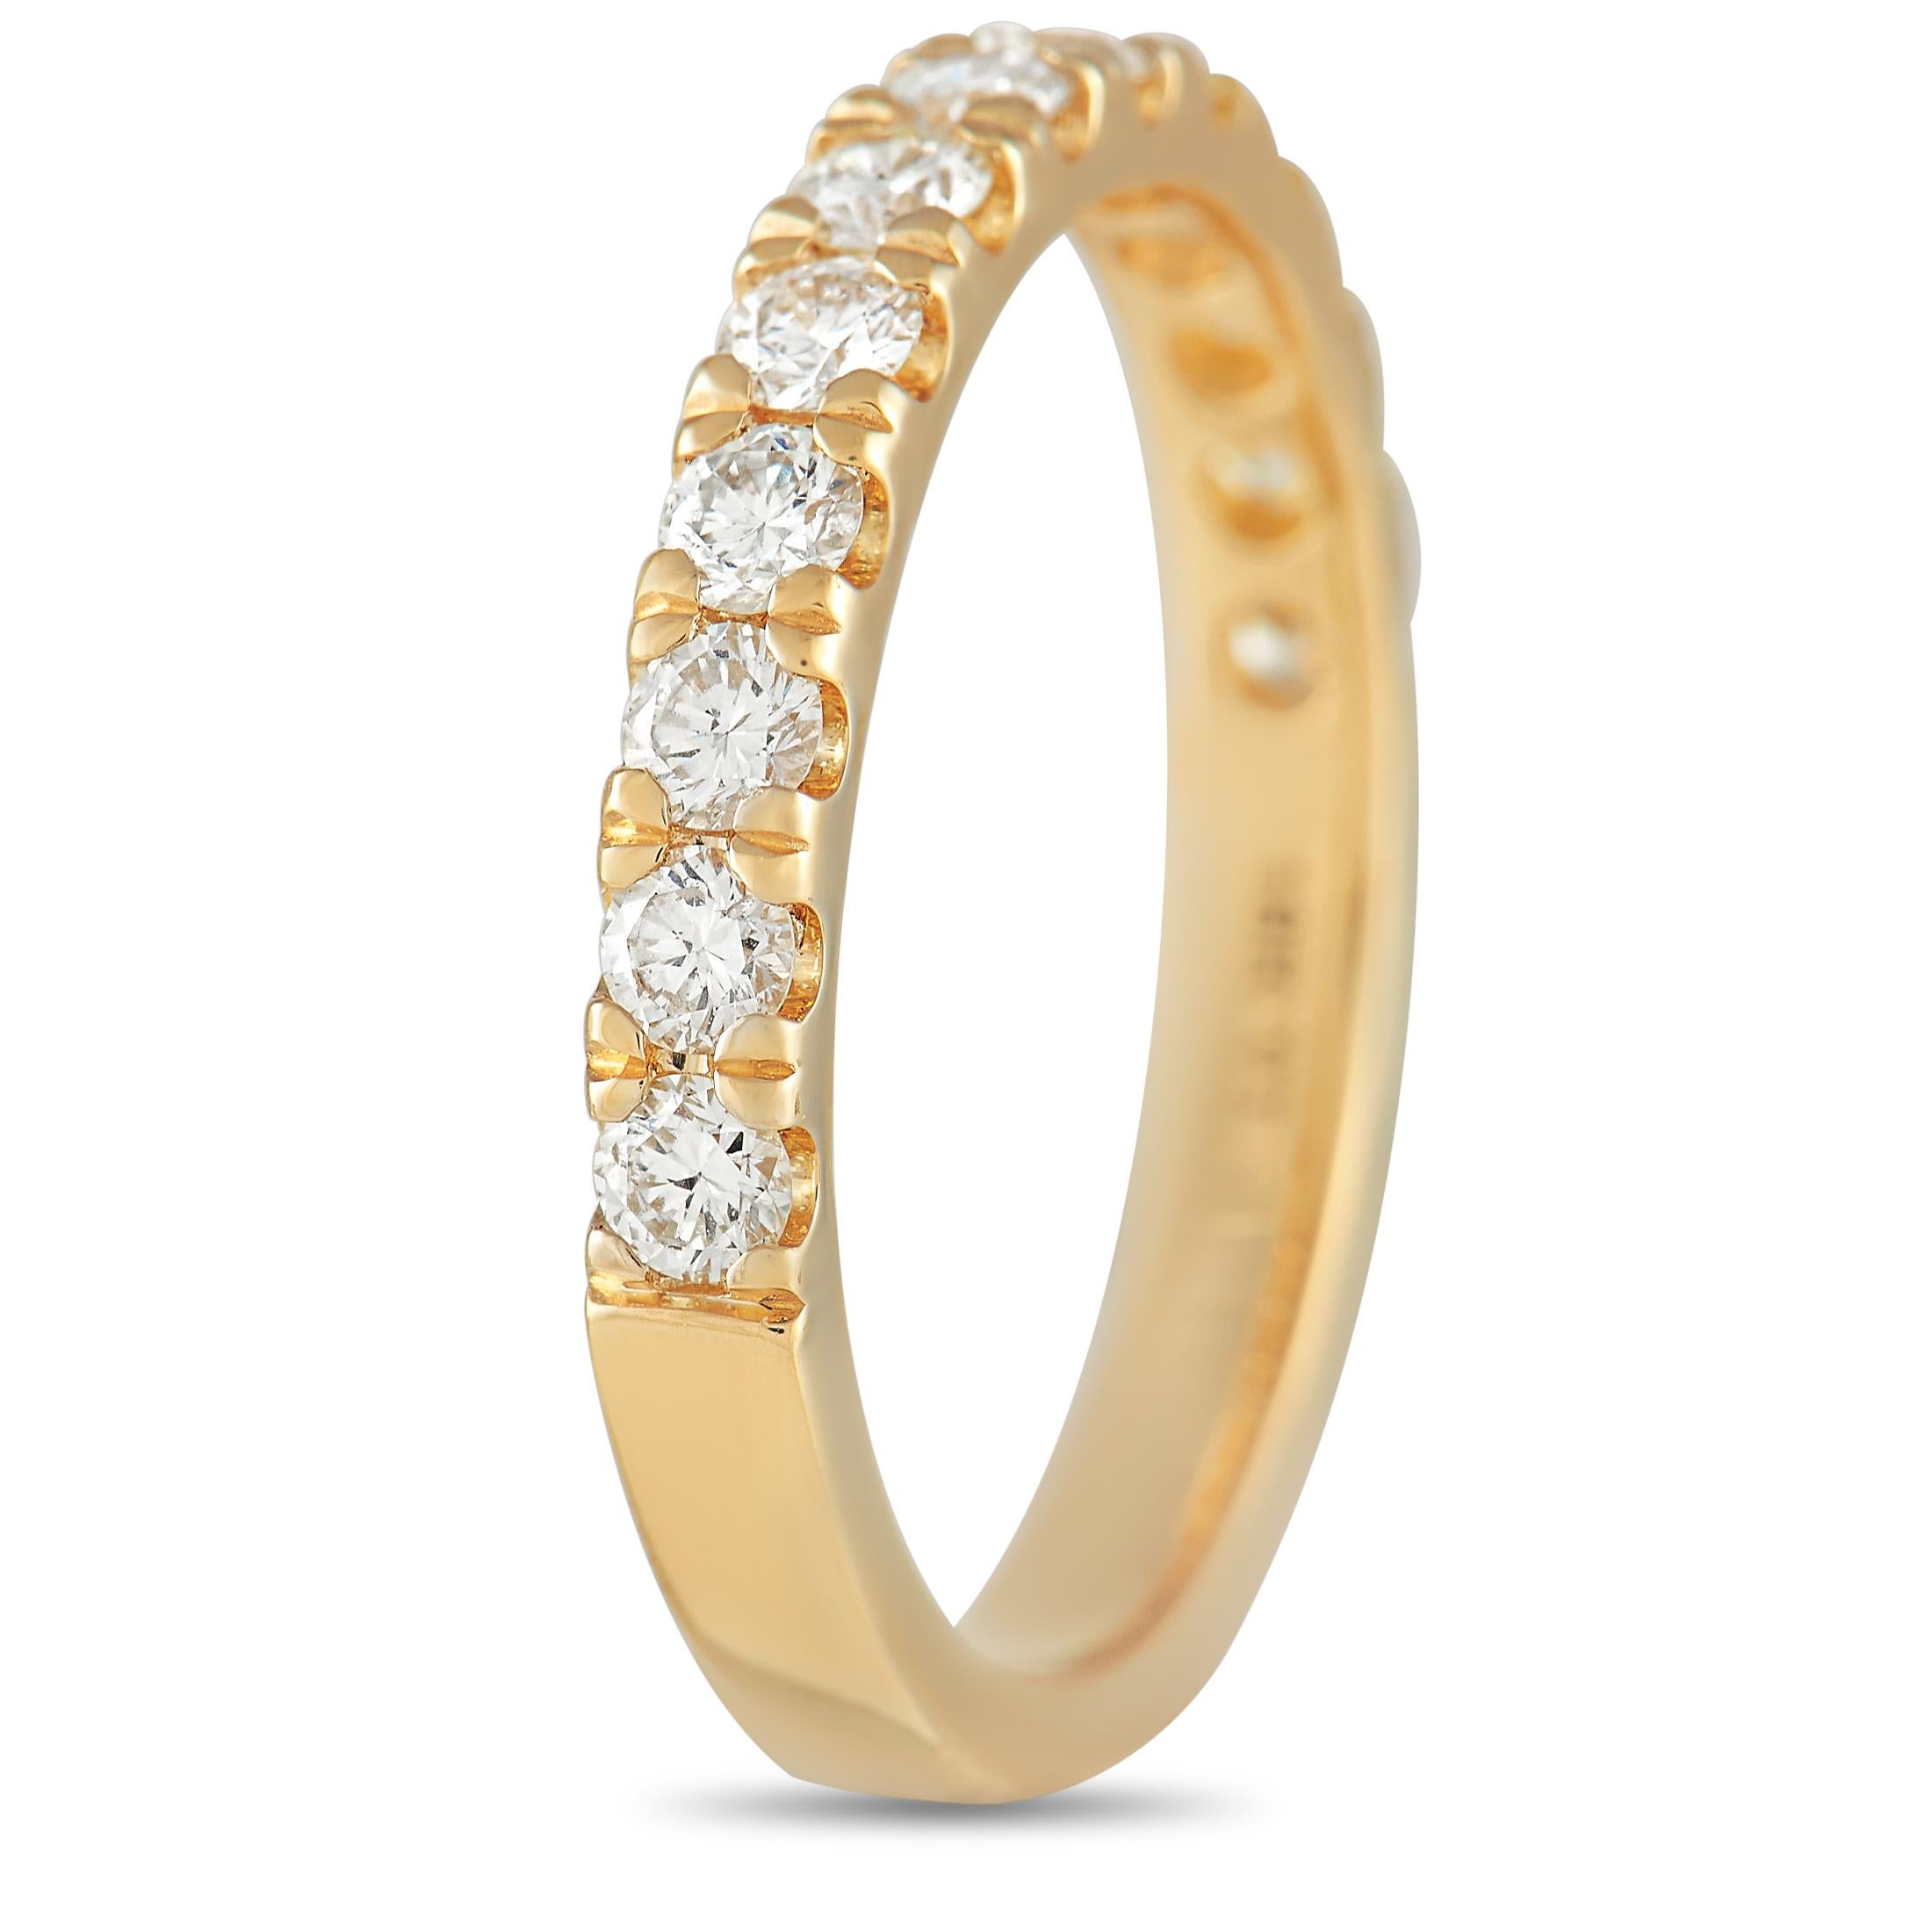 This ring is simple yet incredibly luxurious. An 18K Yellow Gold setting perfectly showcases this ring’s 0.72 carats of sparkling diamonds. A 2mm wide band and a 1mm top height make it an effortless piece that will continually capture your